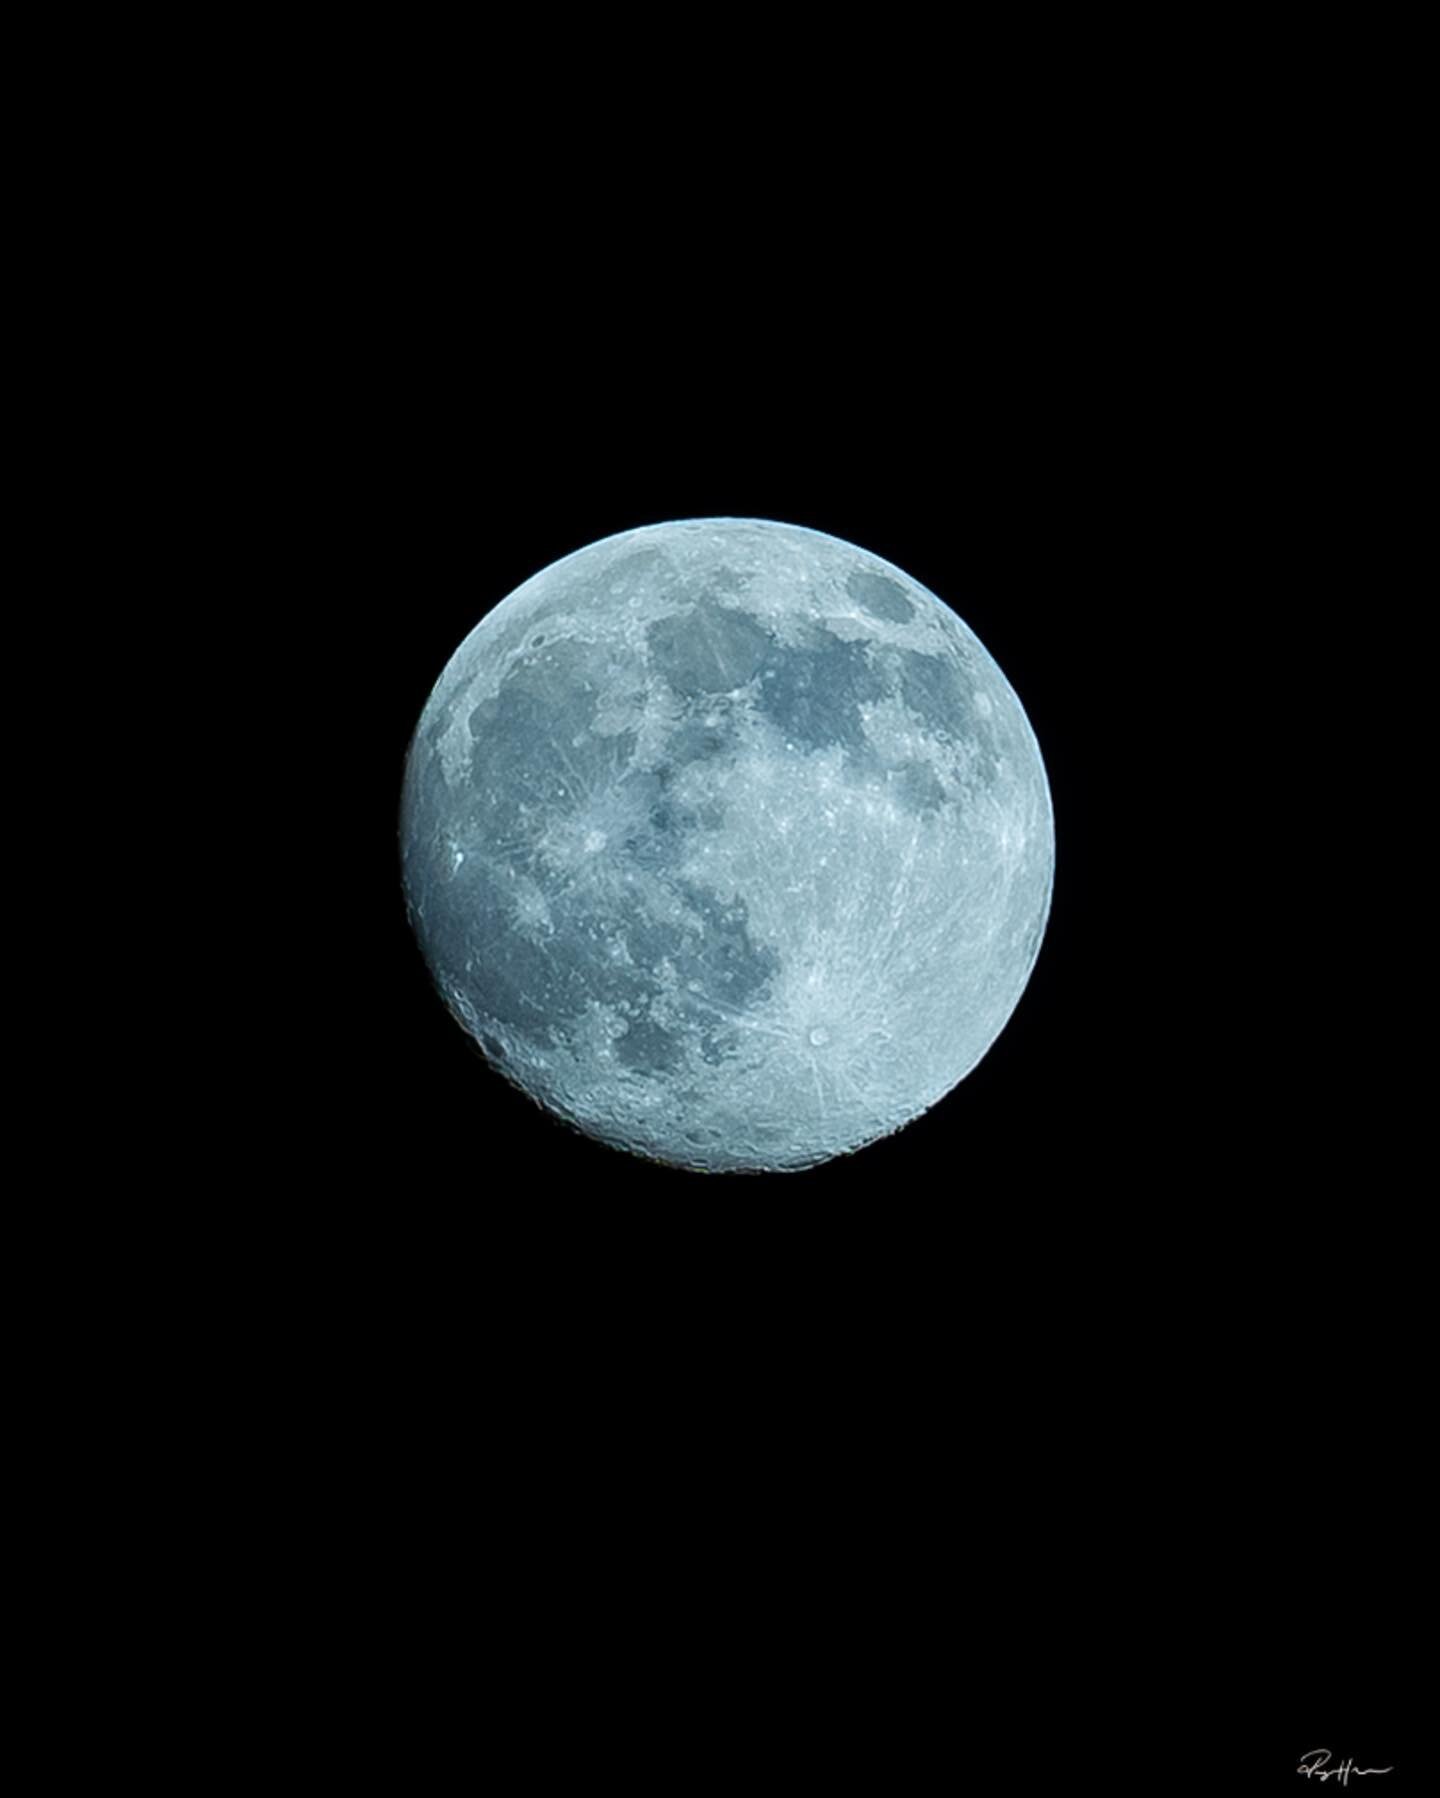 I just had to shoot some photos of the supermoon last night from my porch... I need to try a bigger lens next time. Would be fun testing a 800mm lens for this. The moon never stops to fascinate me, so cool to see all the craters and details. 

www.ro